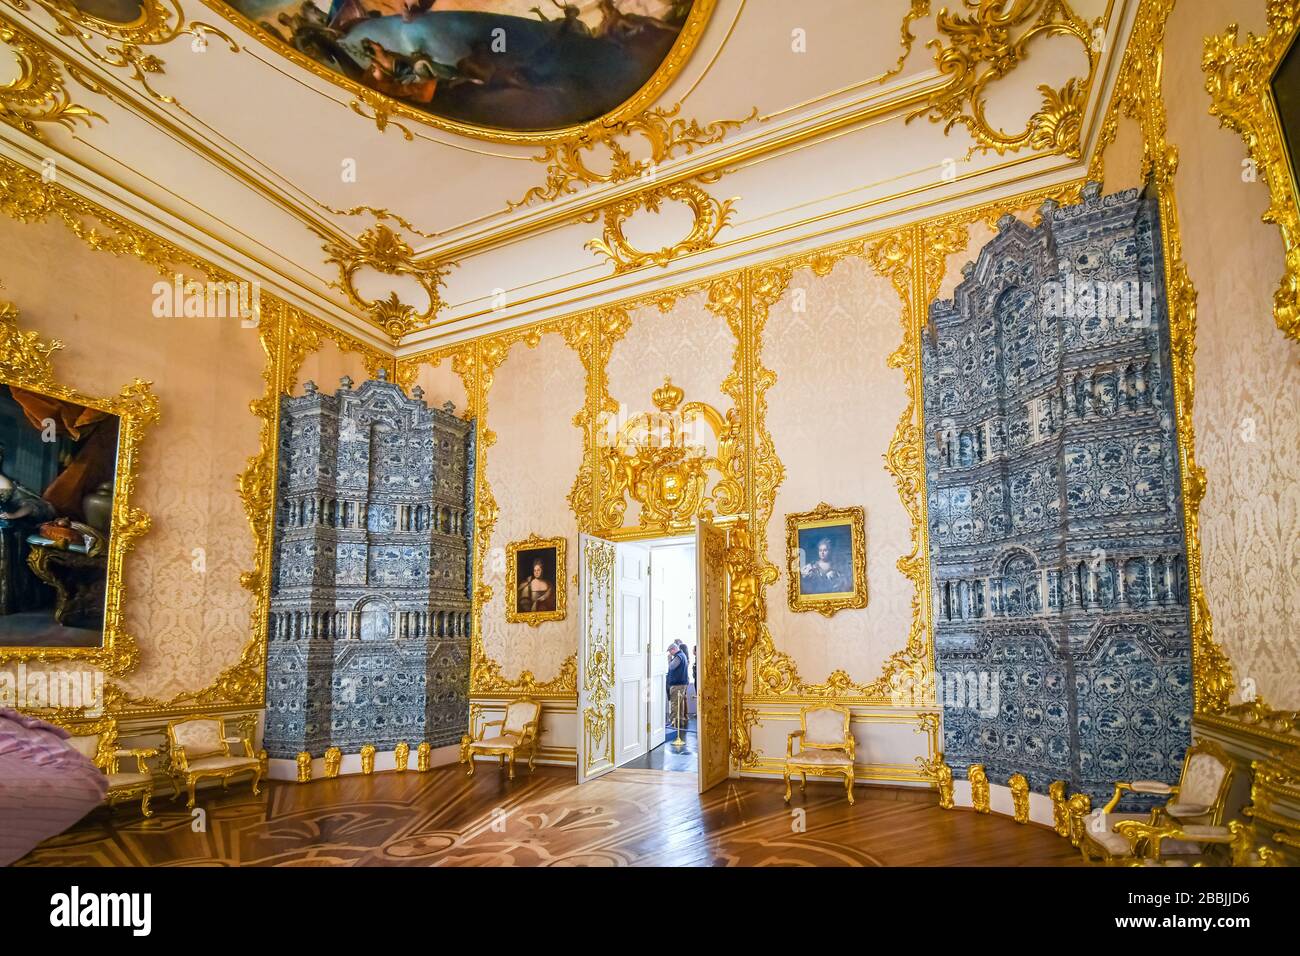 Inside one of the grand palatial rooms with gold trim and artwork on the ceilings in Catherine Palace in Pushkin Russia. Stock Photo